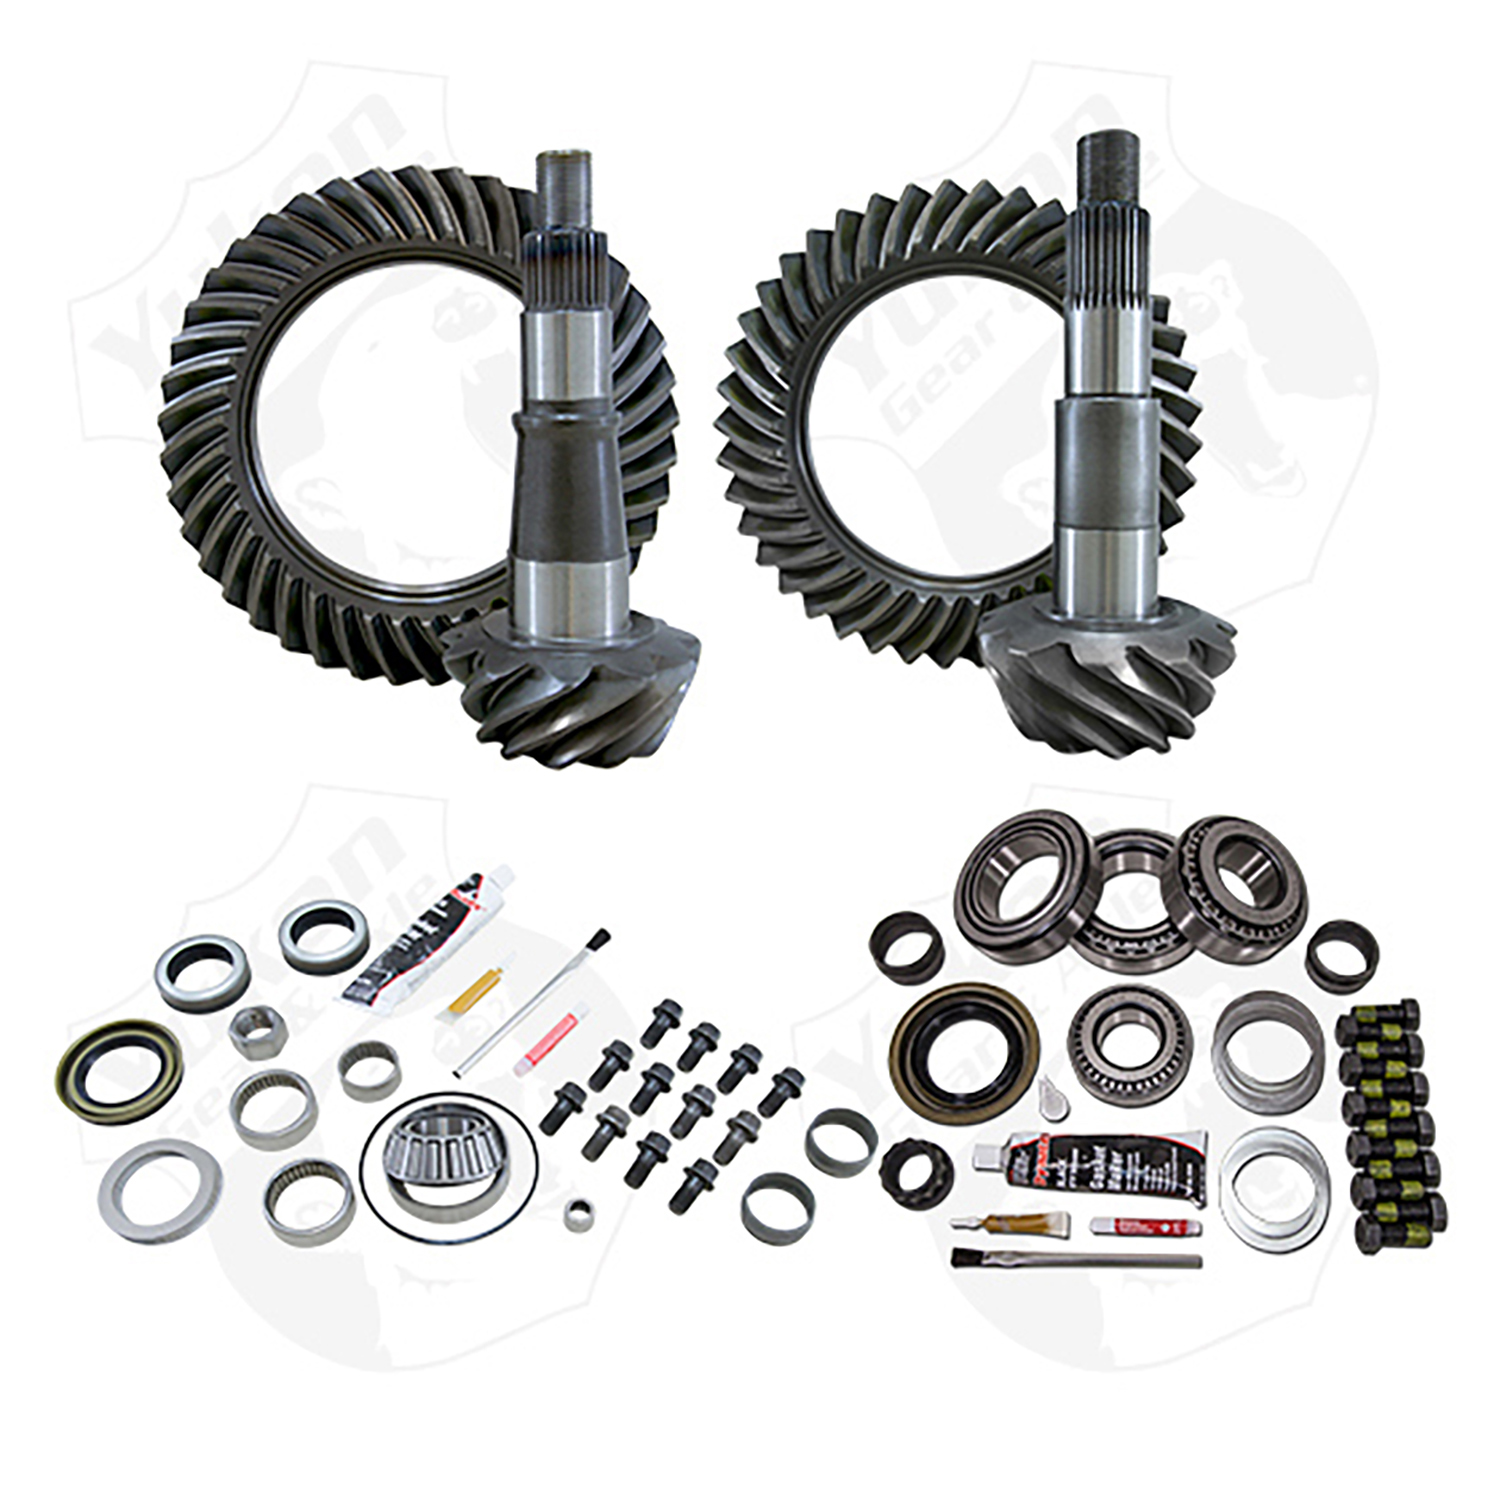 Gear & Install Kit Package For 2011-2013 Ram 2500 And 3500, 4.88 Ratio